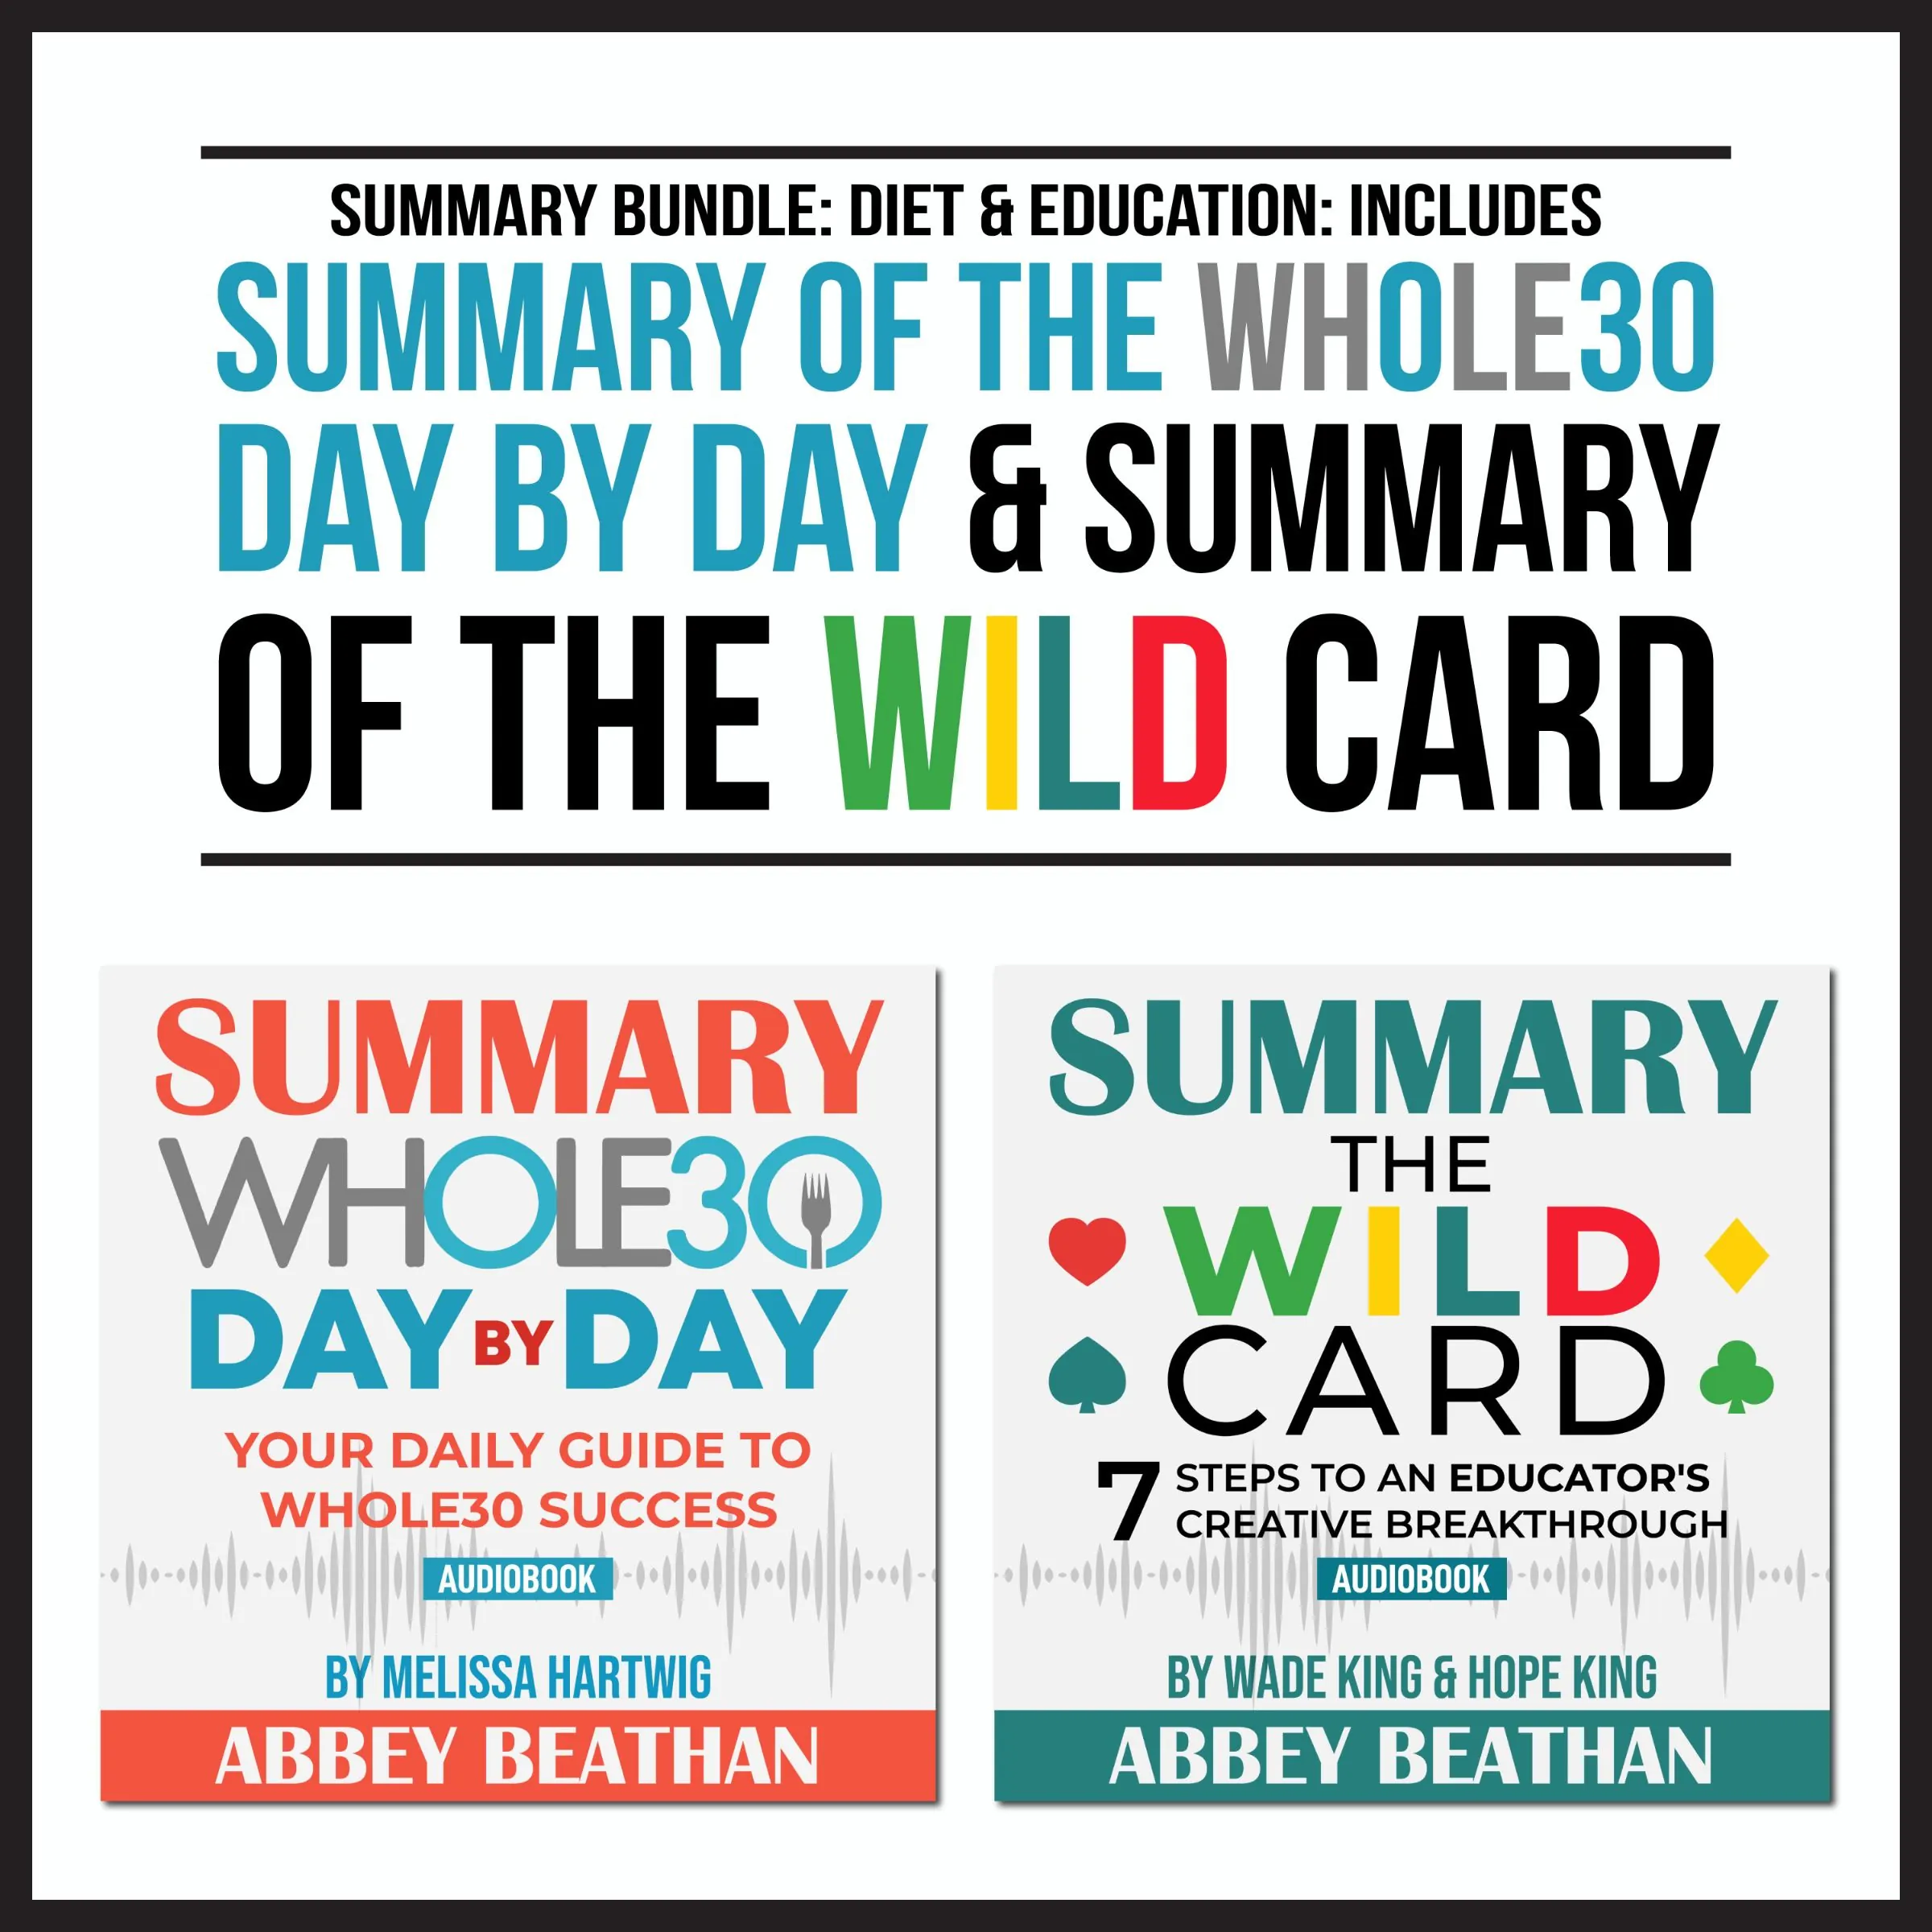 Summary Bundle: Diet &amp; Education: Includes Summary of The Whole30 Day by Day &amp; Summary of The Wild Card Audiobook by Abbey Beathan